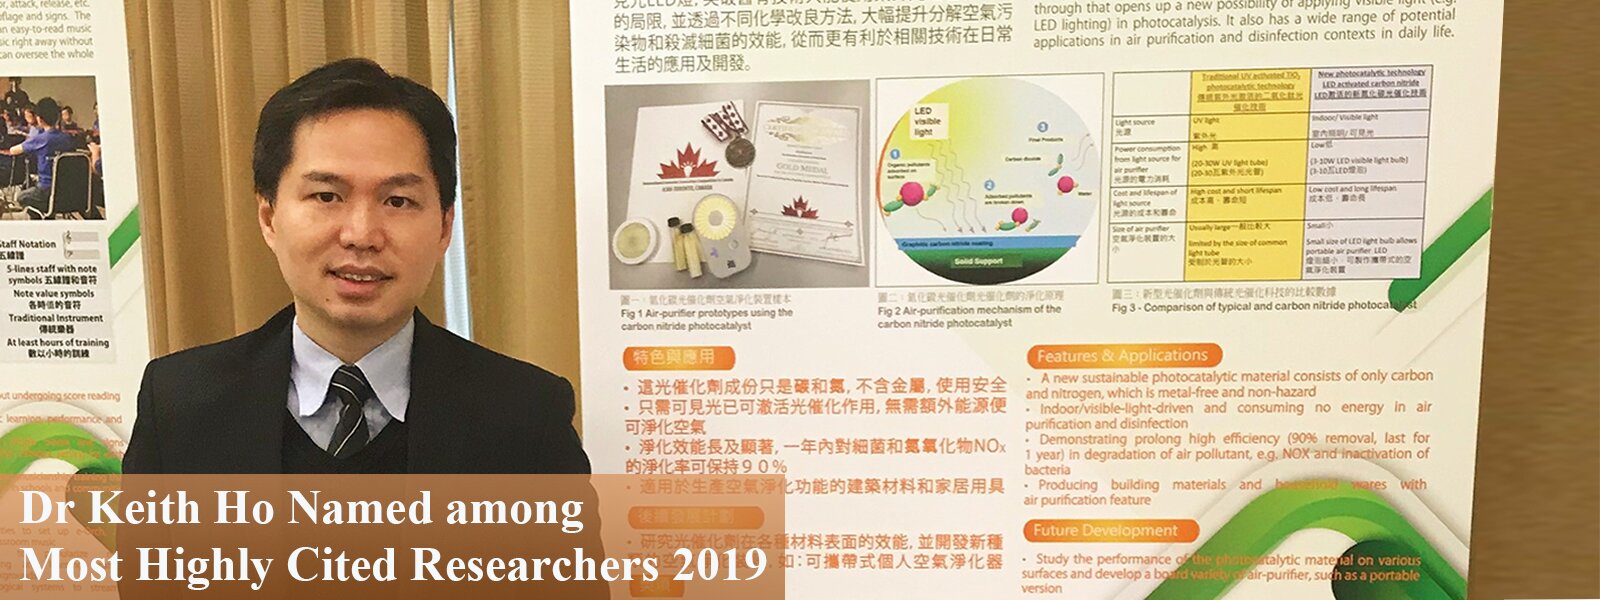 Dr Keith Ho Named among Most Highly Cited Researchers 2019